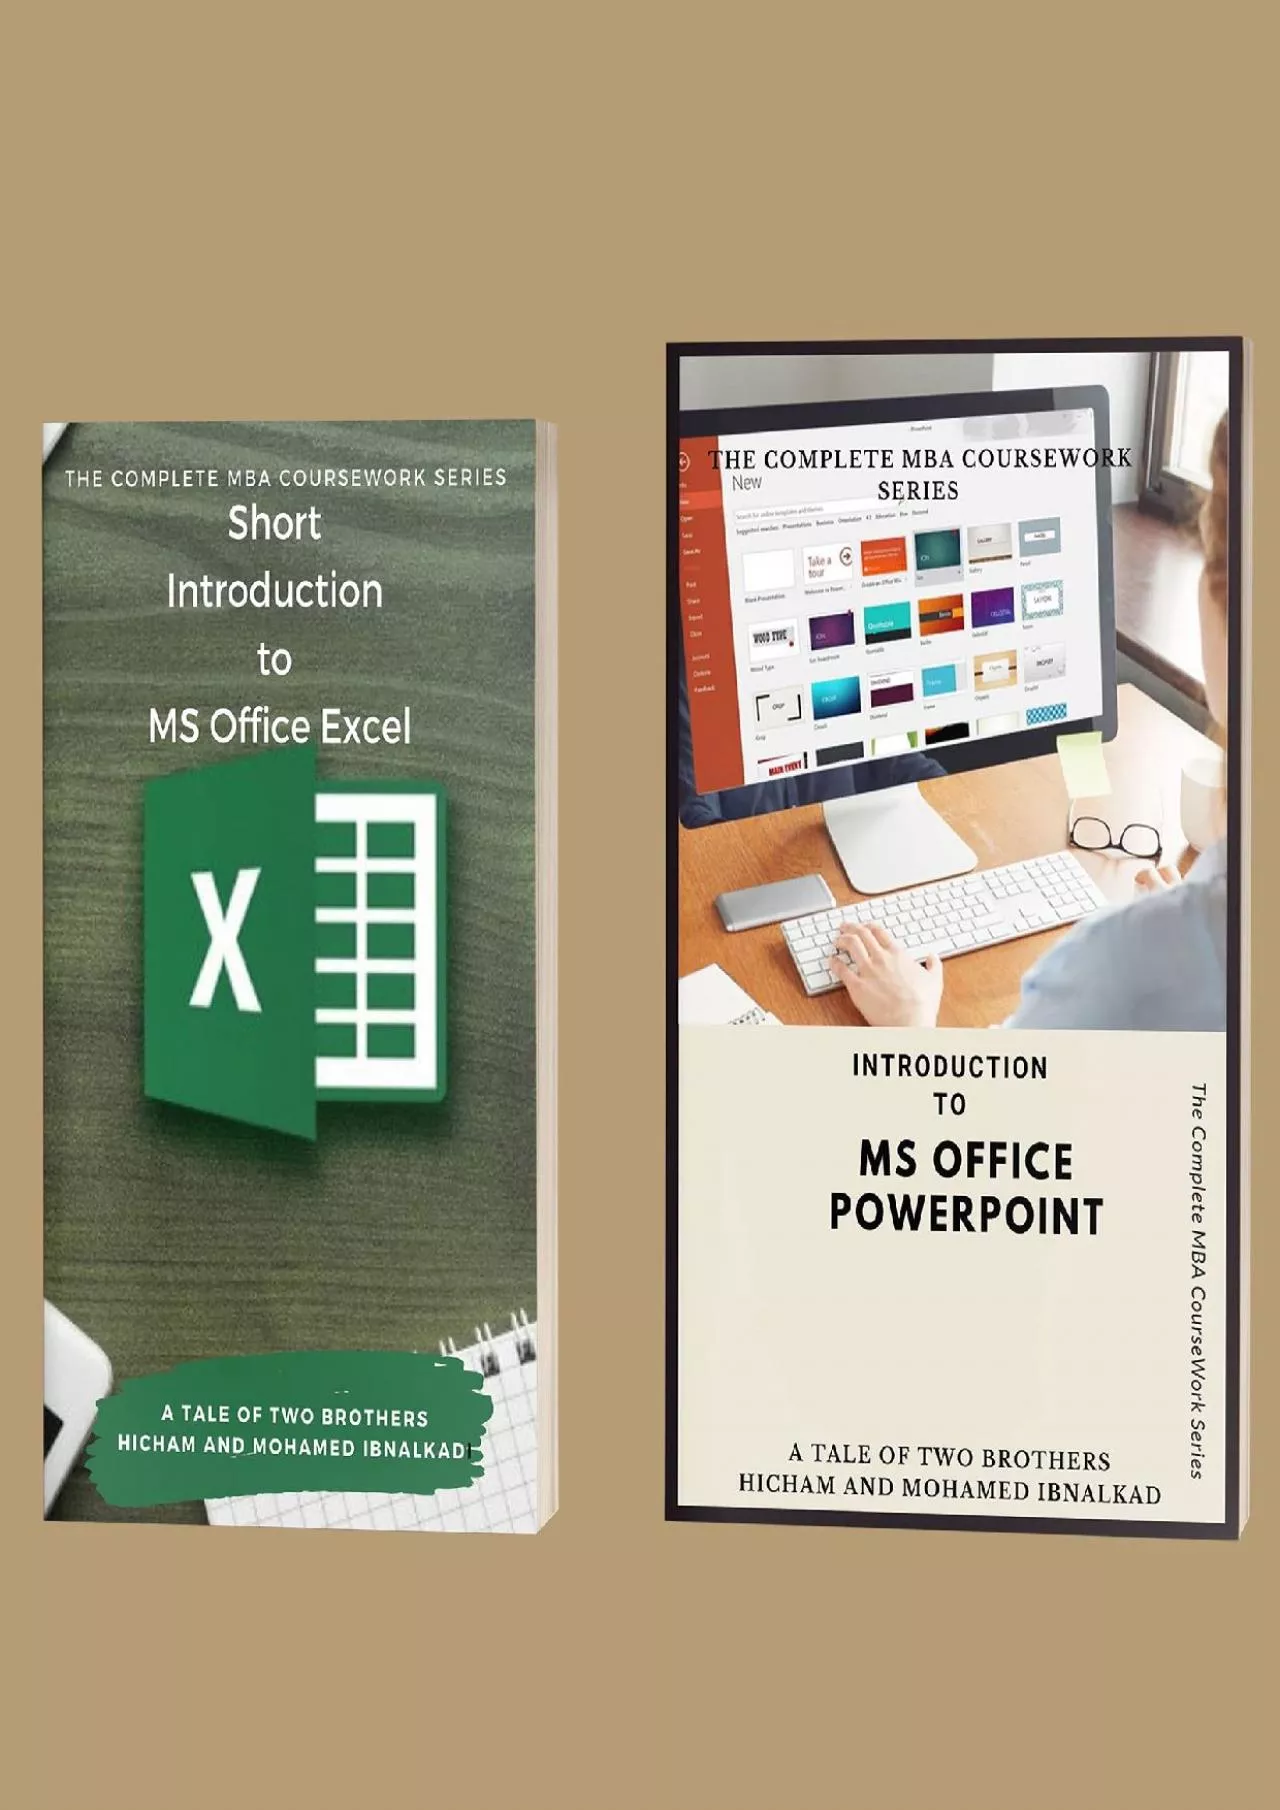 (EBOOK)-The Complete MBA Coursework Bundle 1-2 : Introduction to MS Office PowerPoint